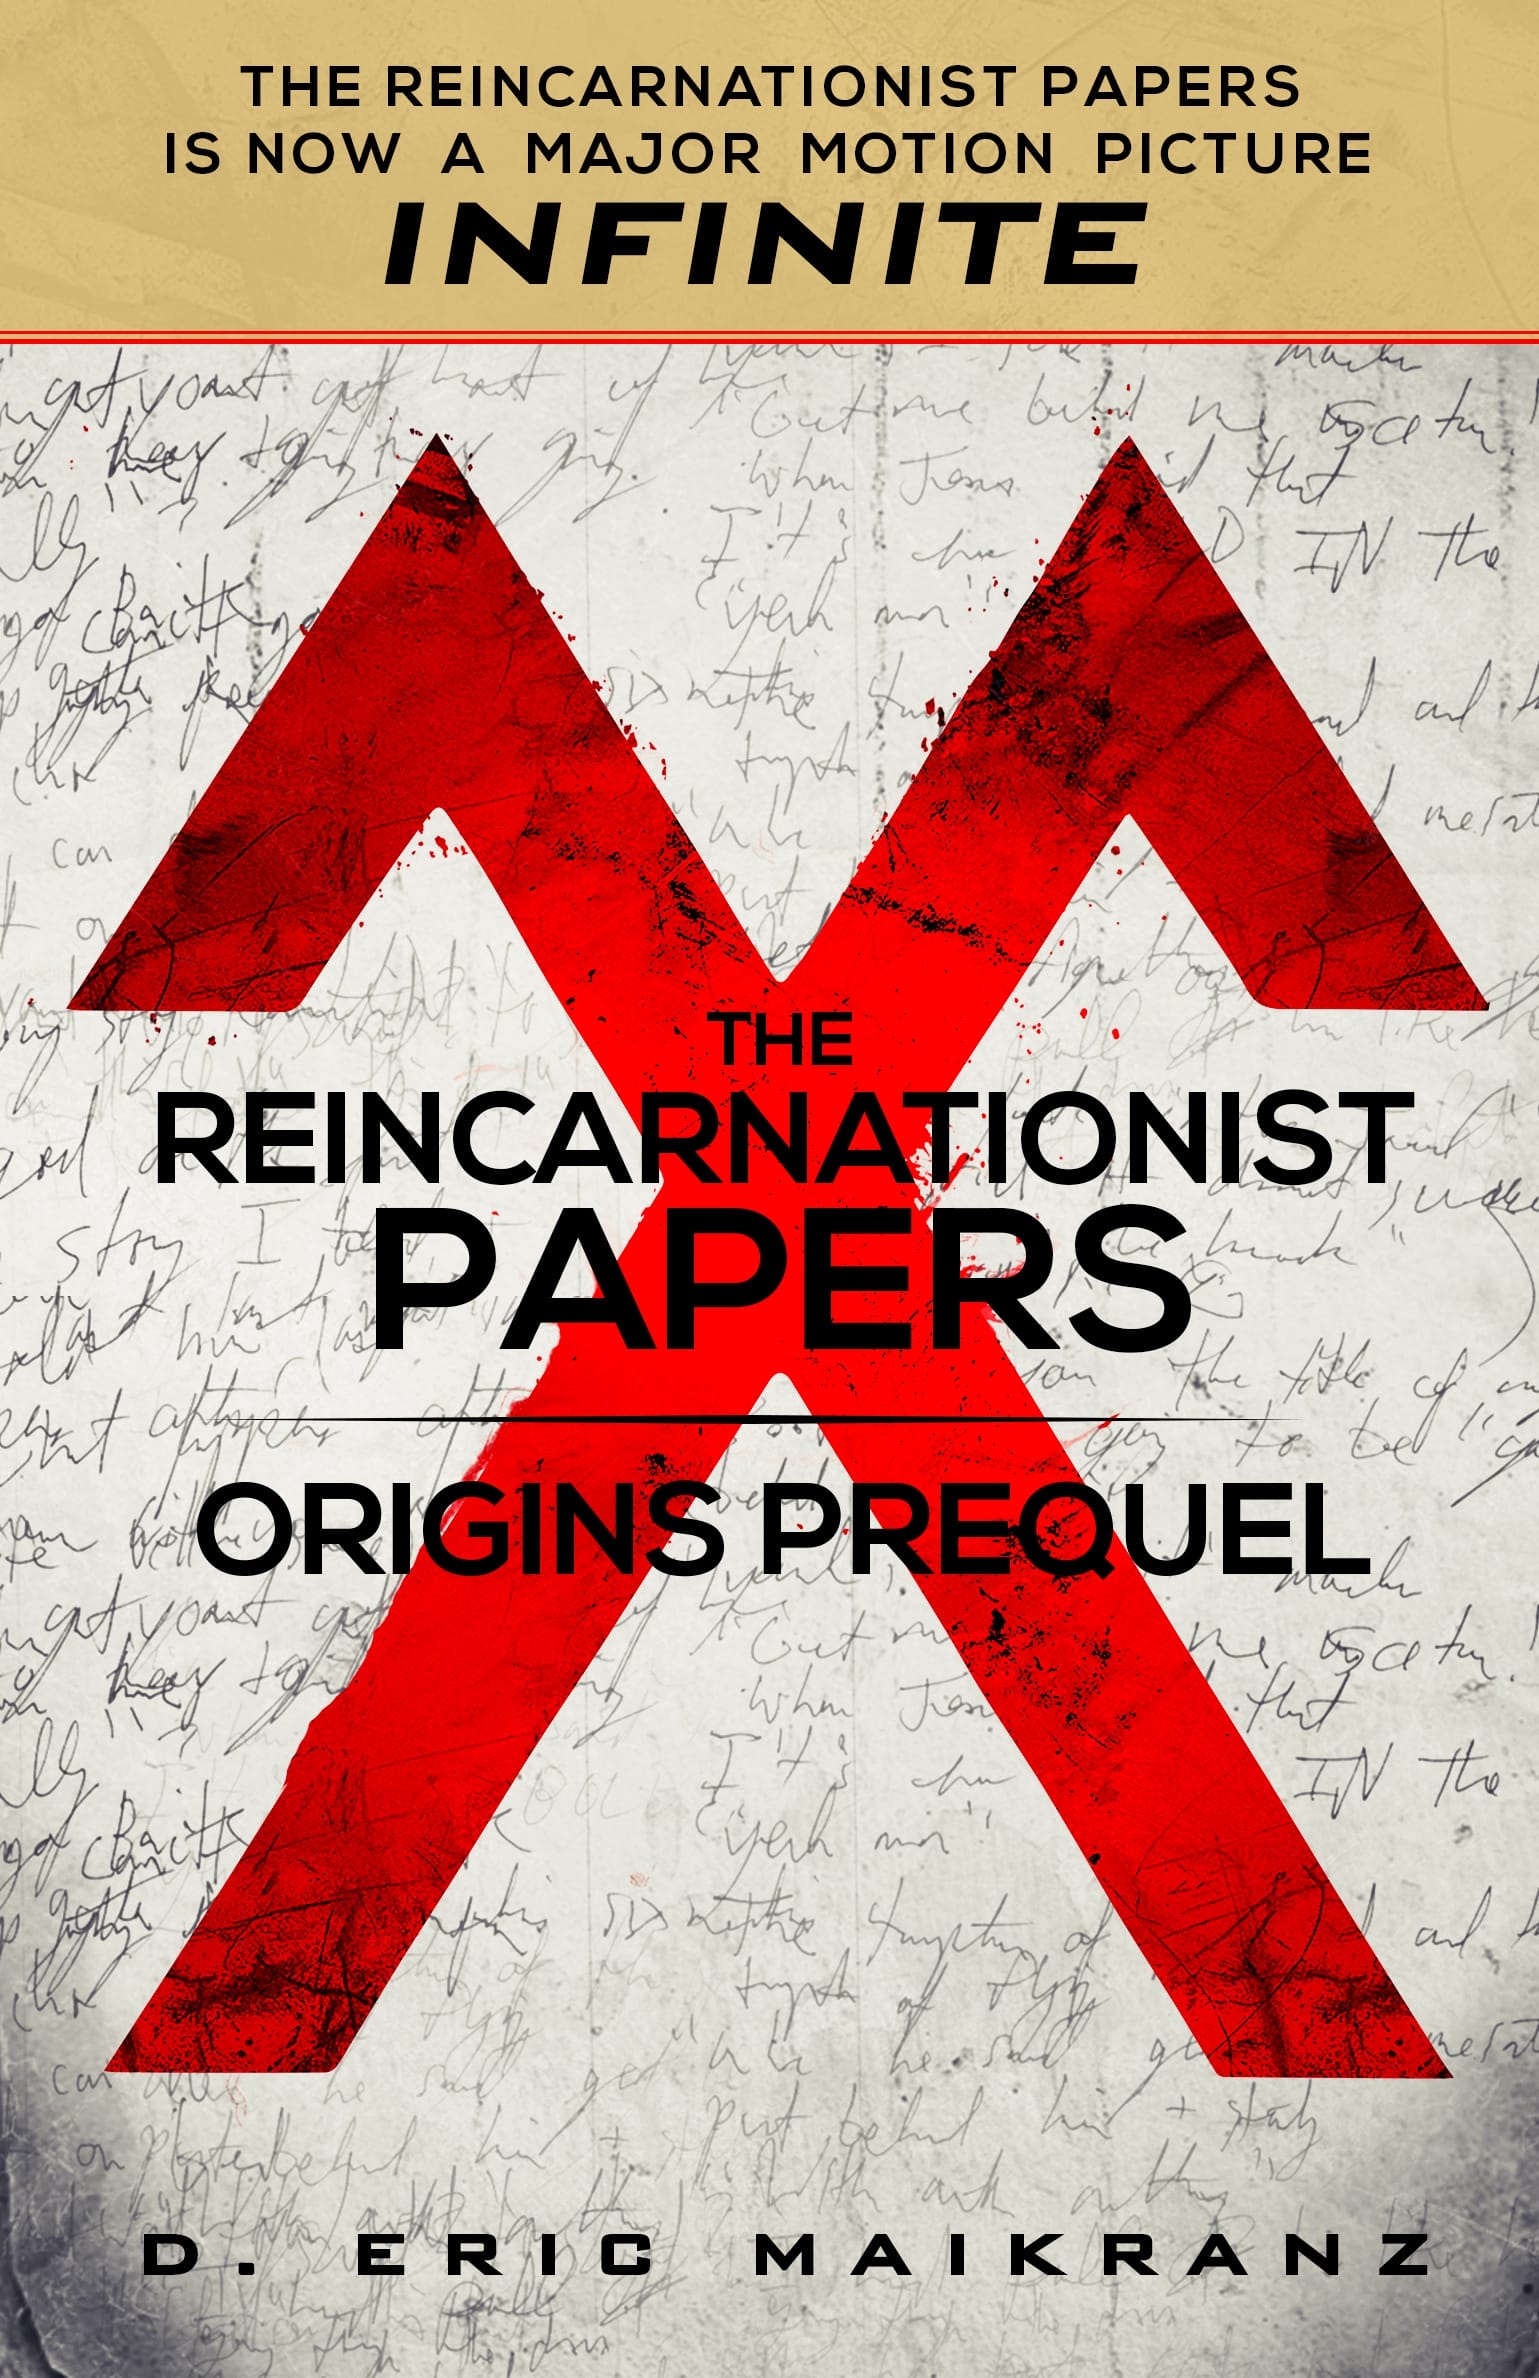 The-Reincarnationist-Papers-white-ebook-cropped.jpg